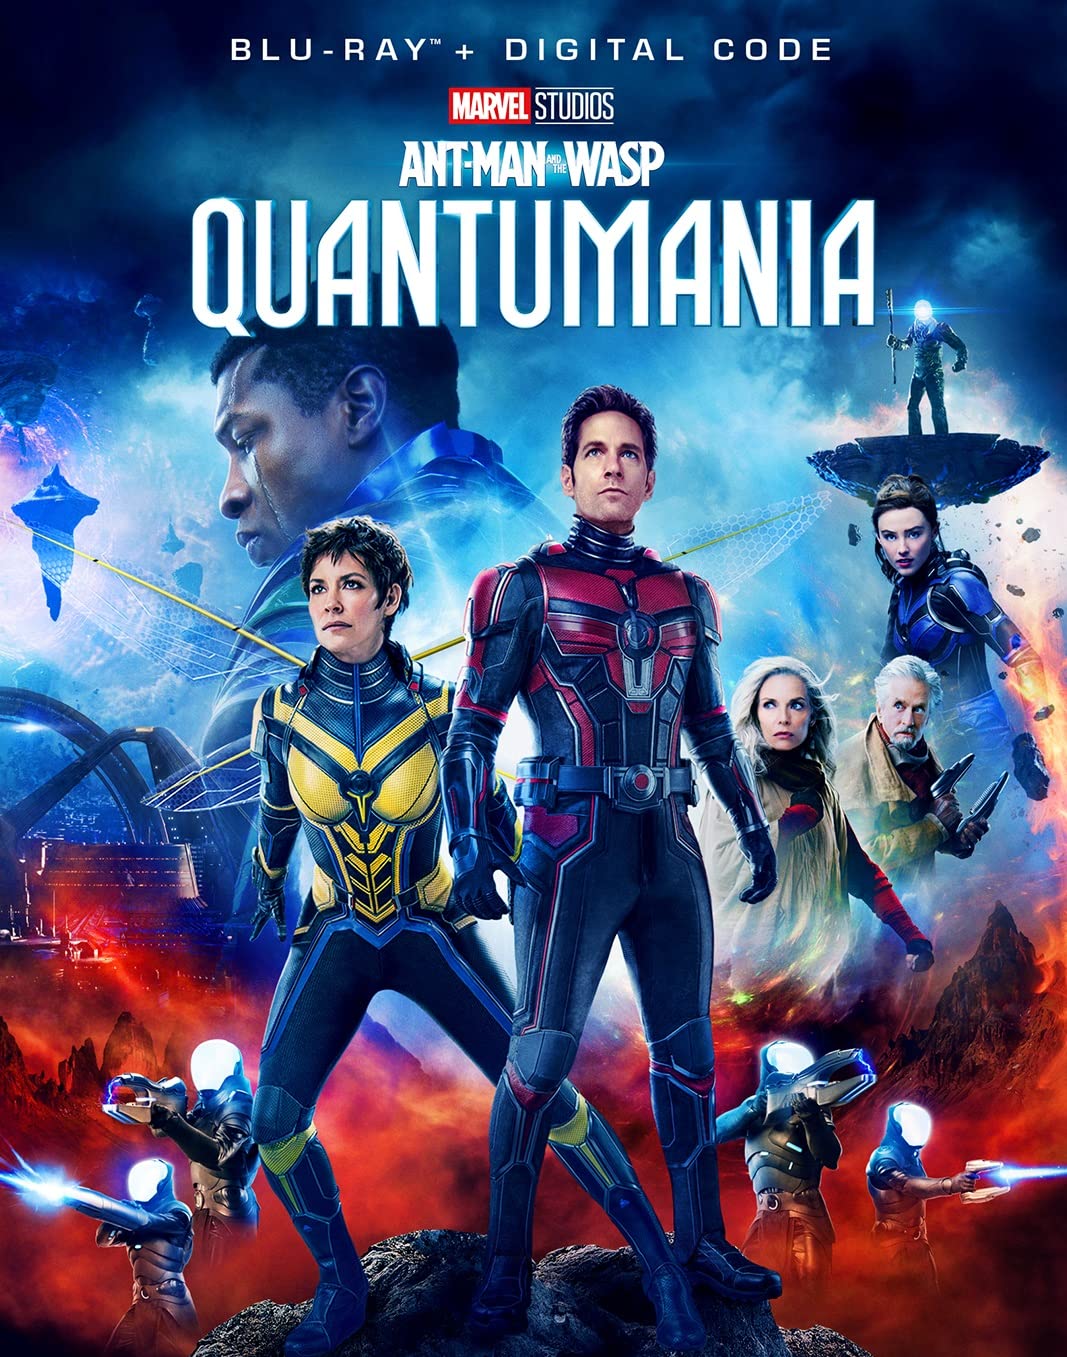 Watching Movies: “Ant-Man and the Wasp: Quantumania”